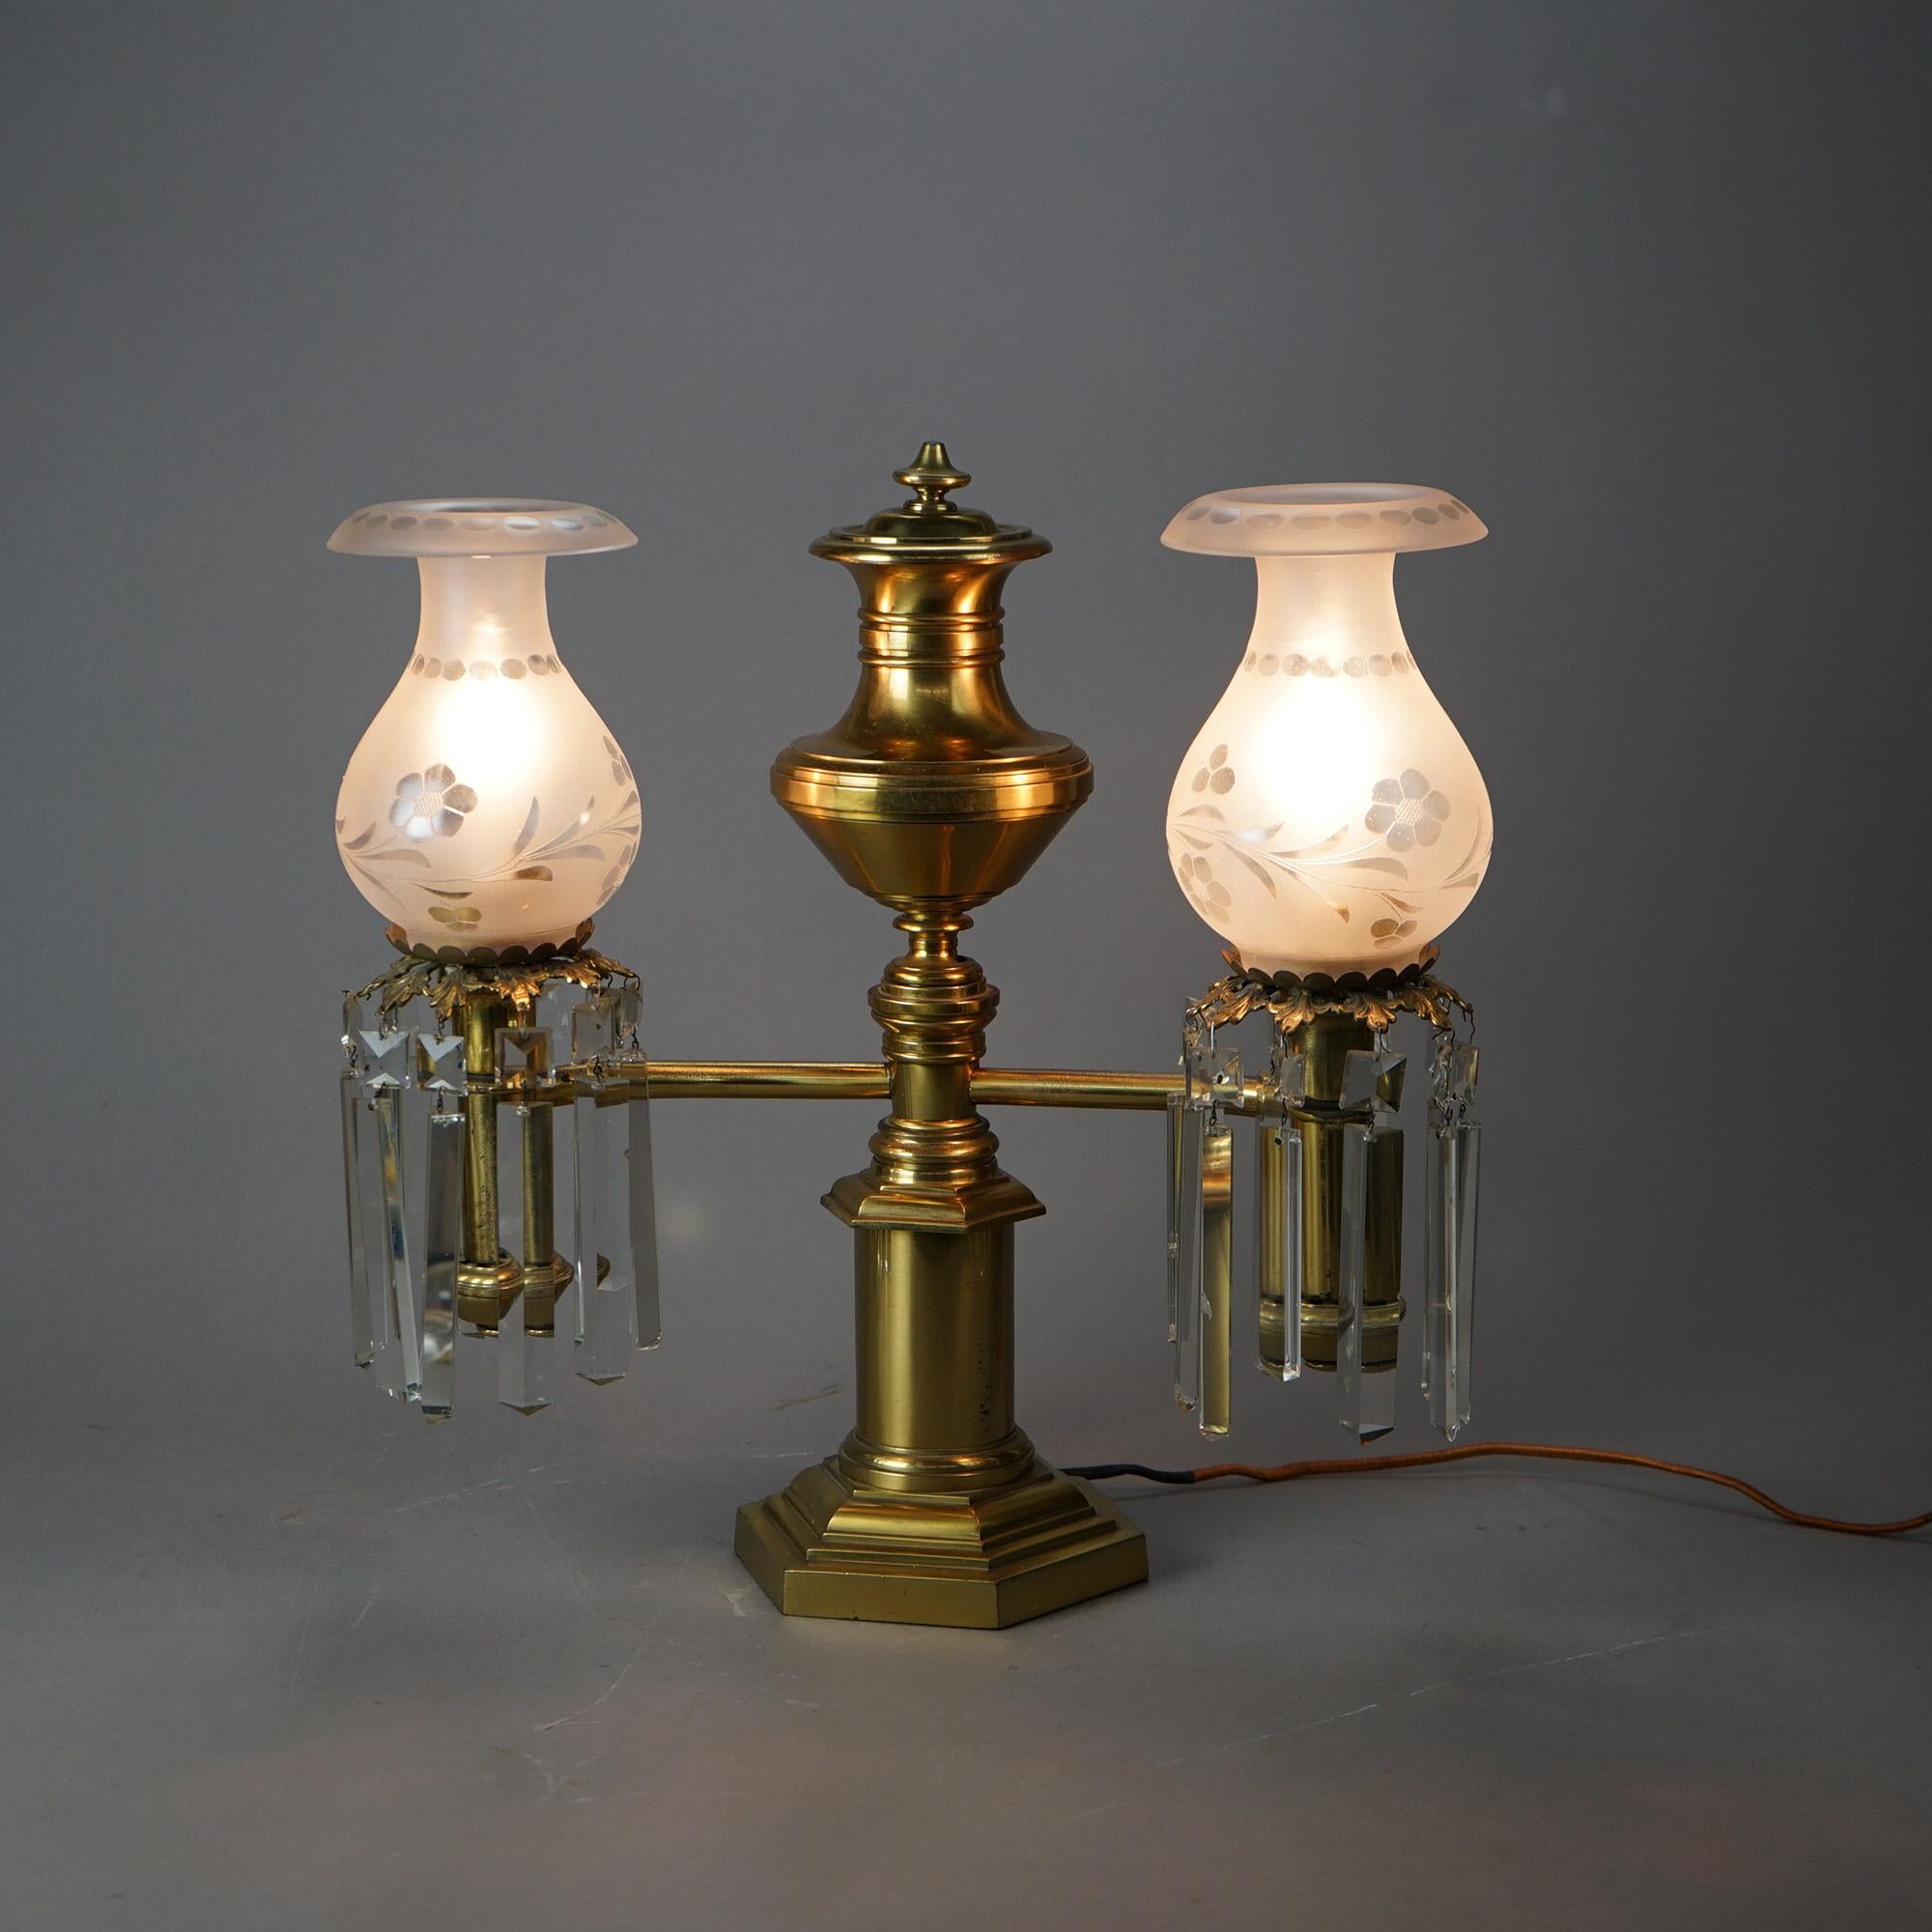 American Antique Gilt Brass & Bronze Double Argand Lamp with Crystal Prisms, 19thC